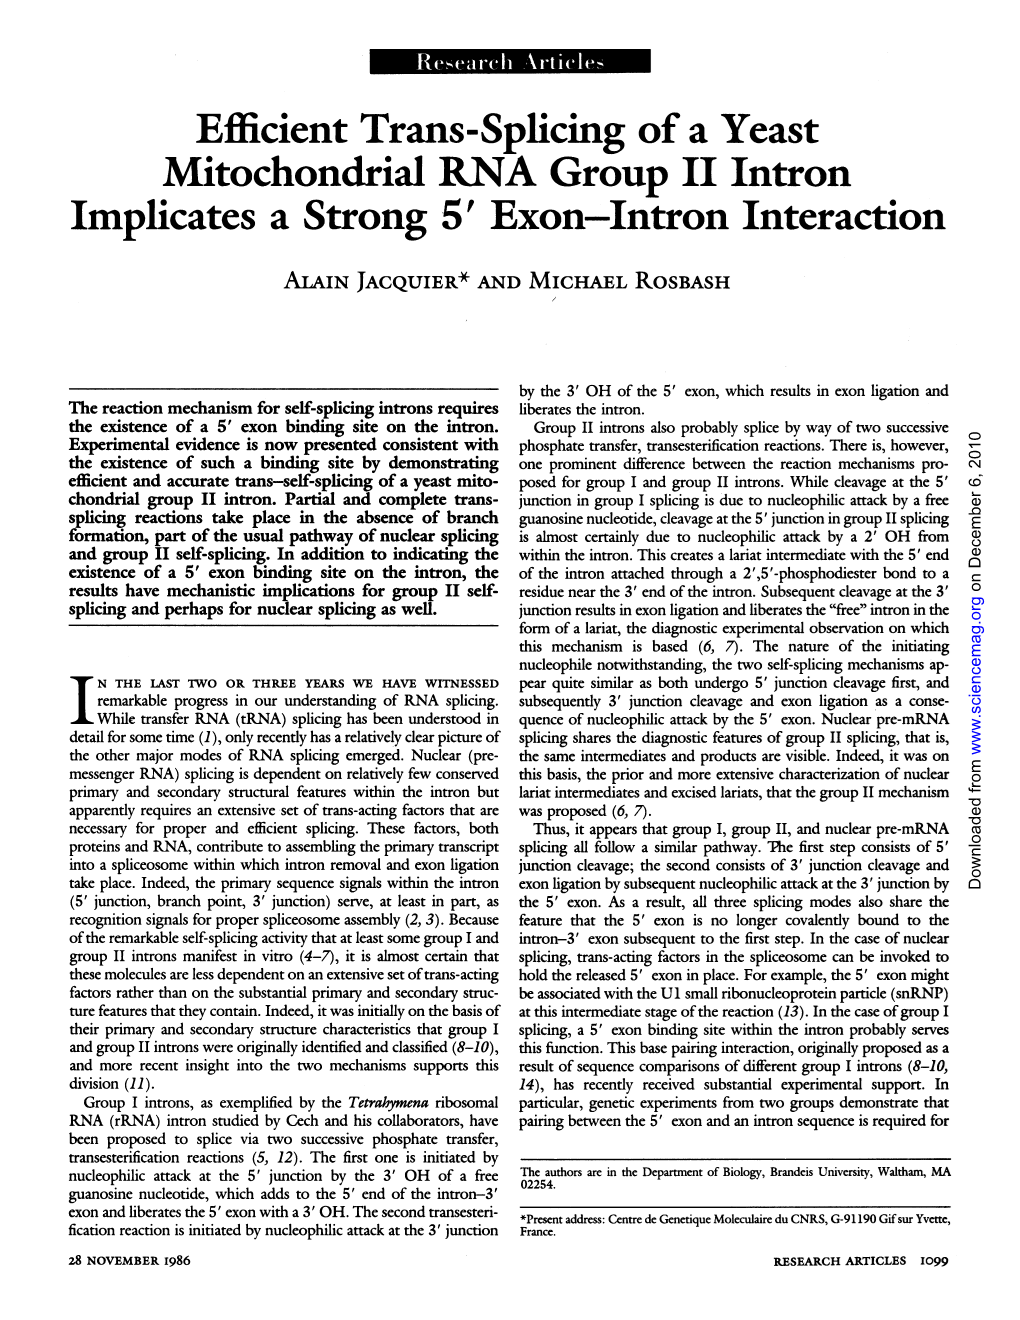 Mitochoncrial RNA Group II Intron Implicates a Strong 5' Exon-Intron Interaction